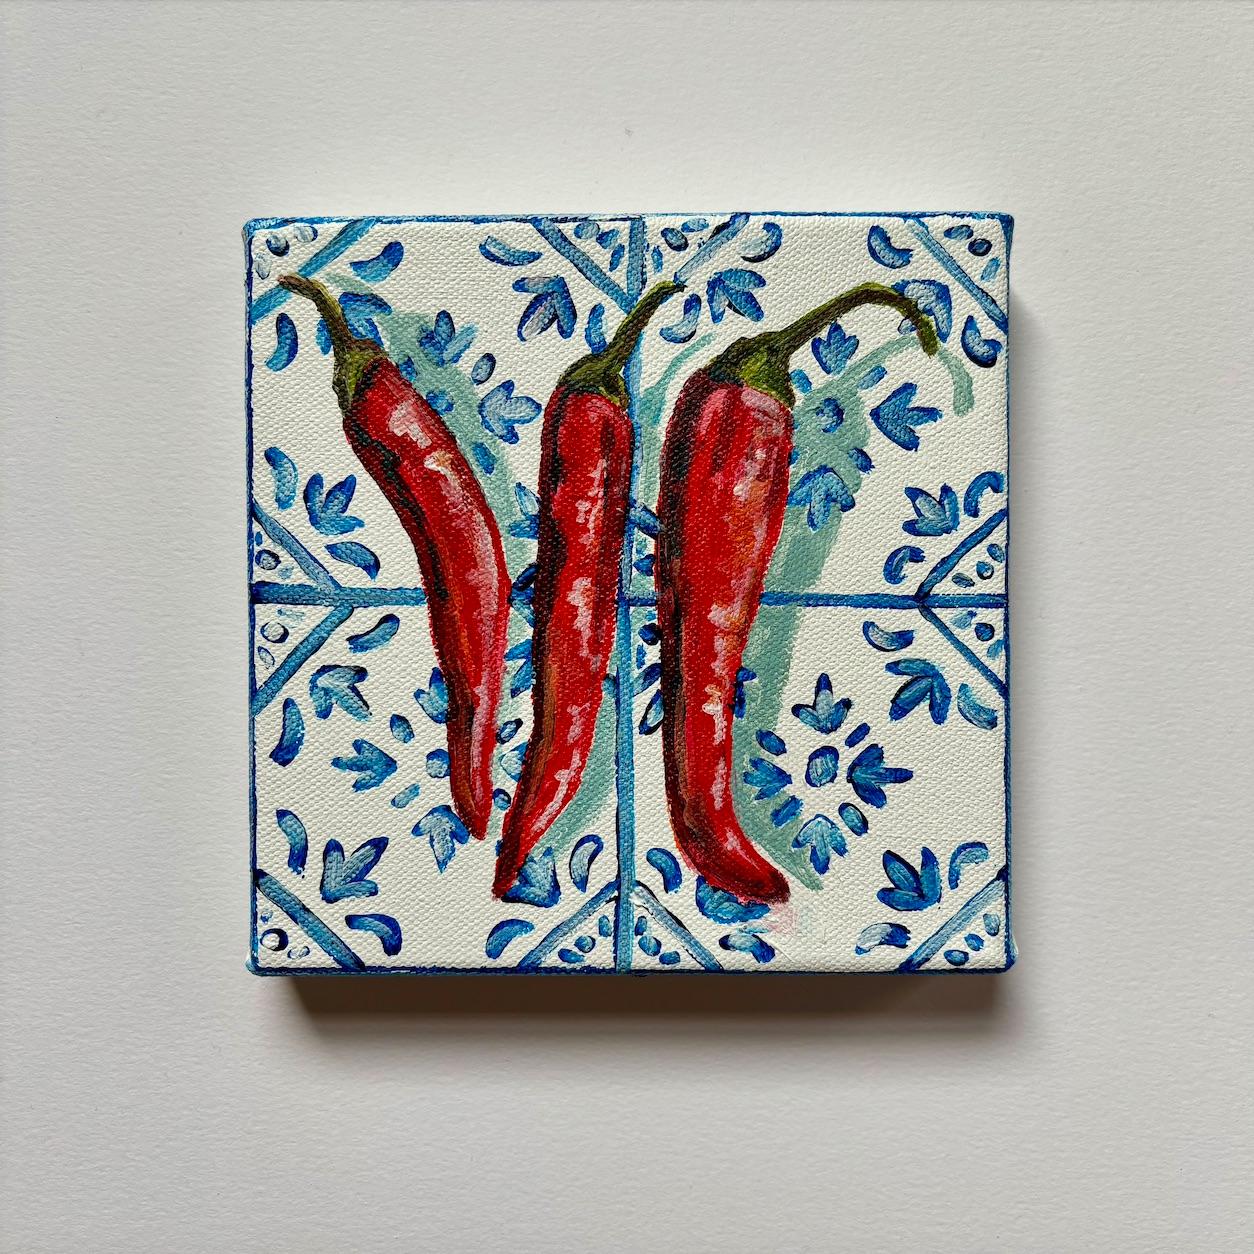 This contemporary still-life depicts three spicy chilli peppers on blue and white Mediterranean tiles. This box canvas is part of my MINI Tiles series, and is ready to be hung unframed. Inspired by my Abuela's home kitchen.

ADDITIONAL